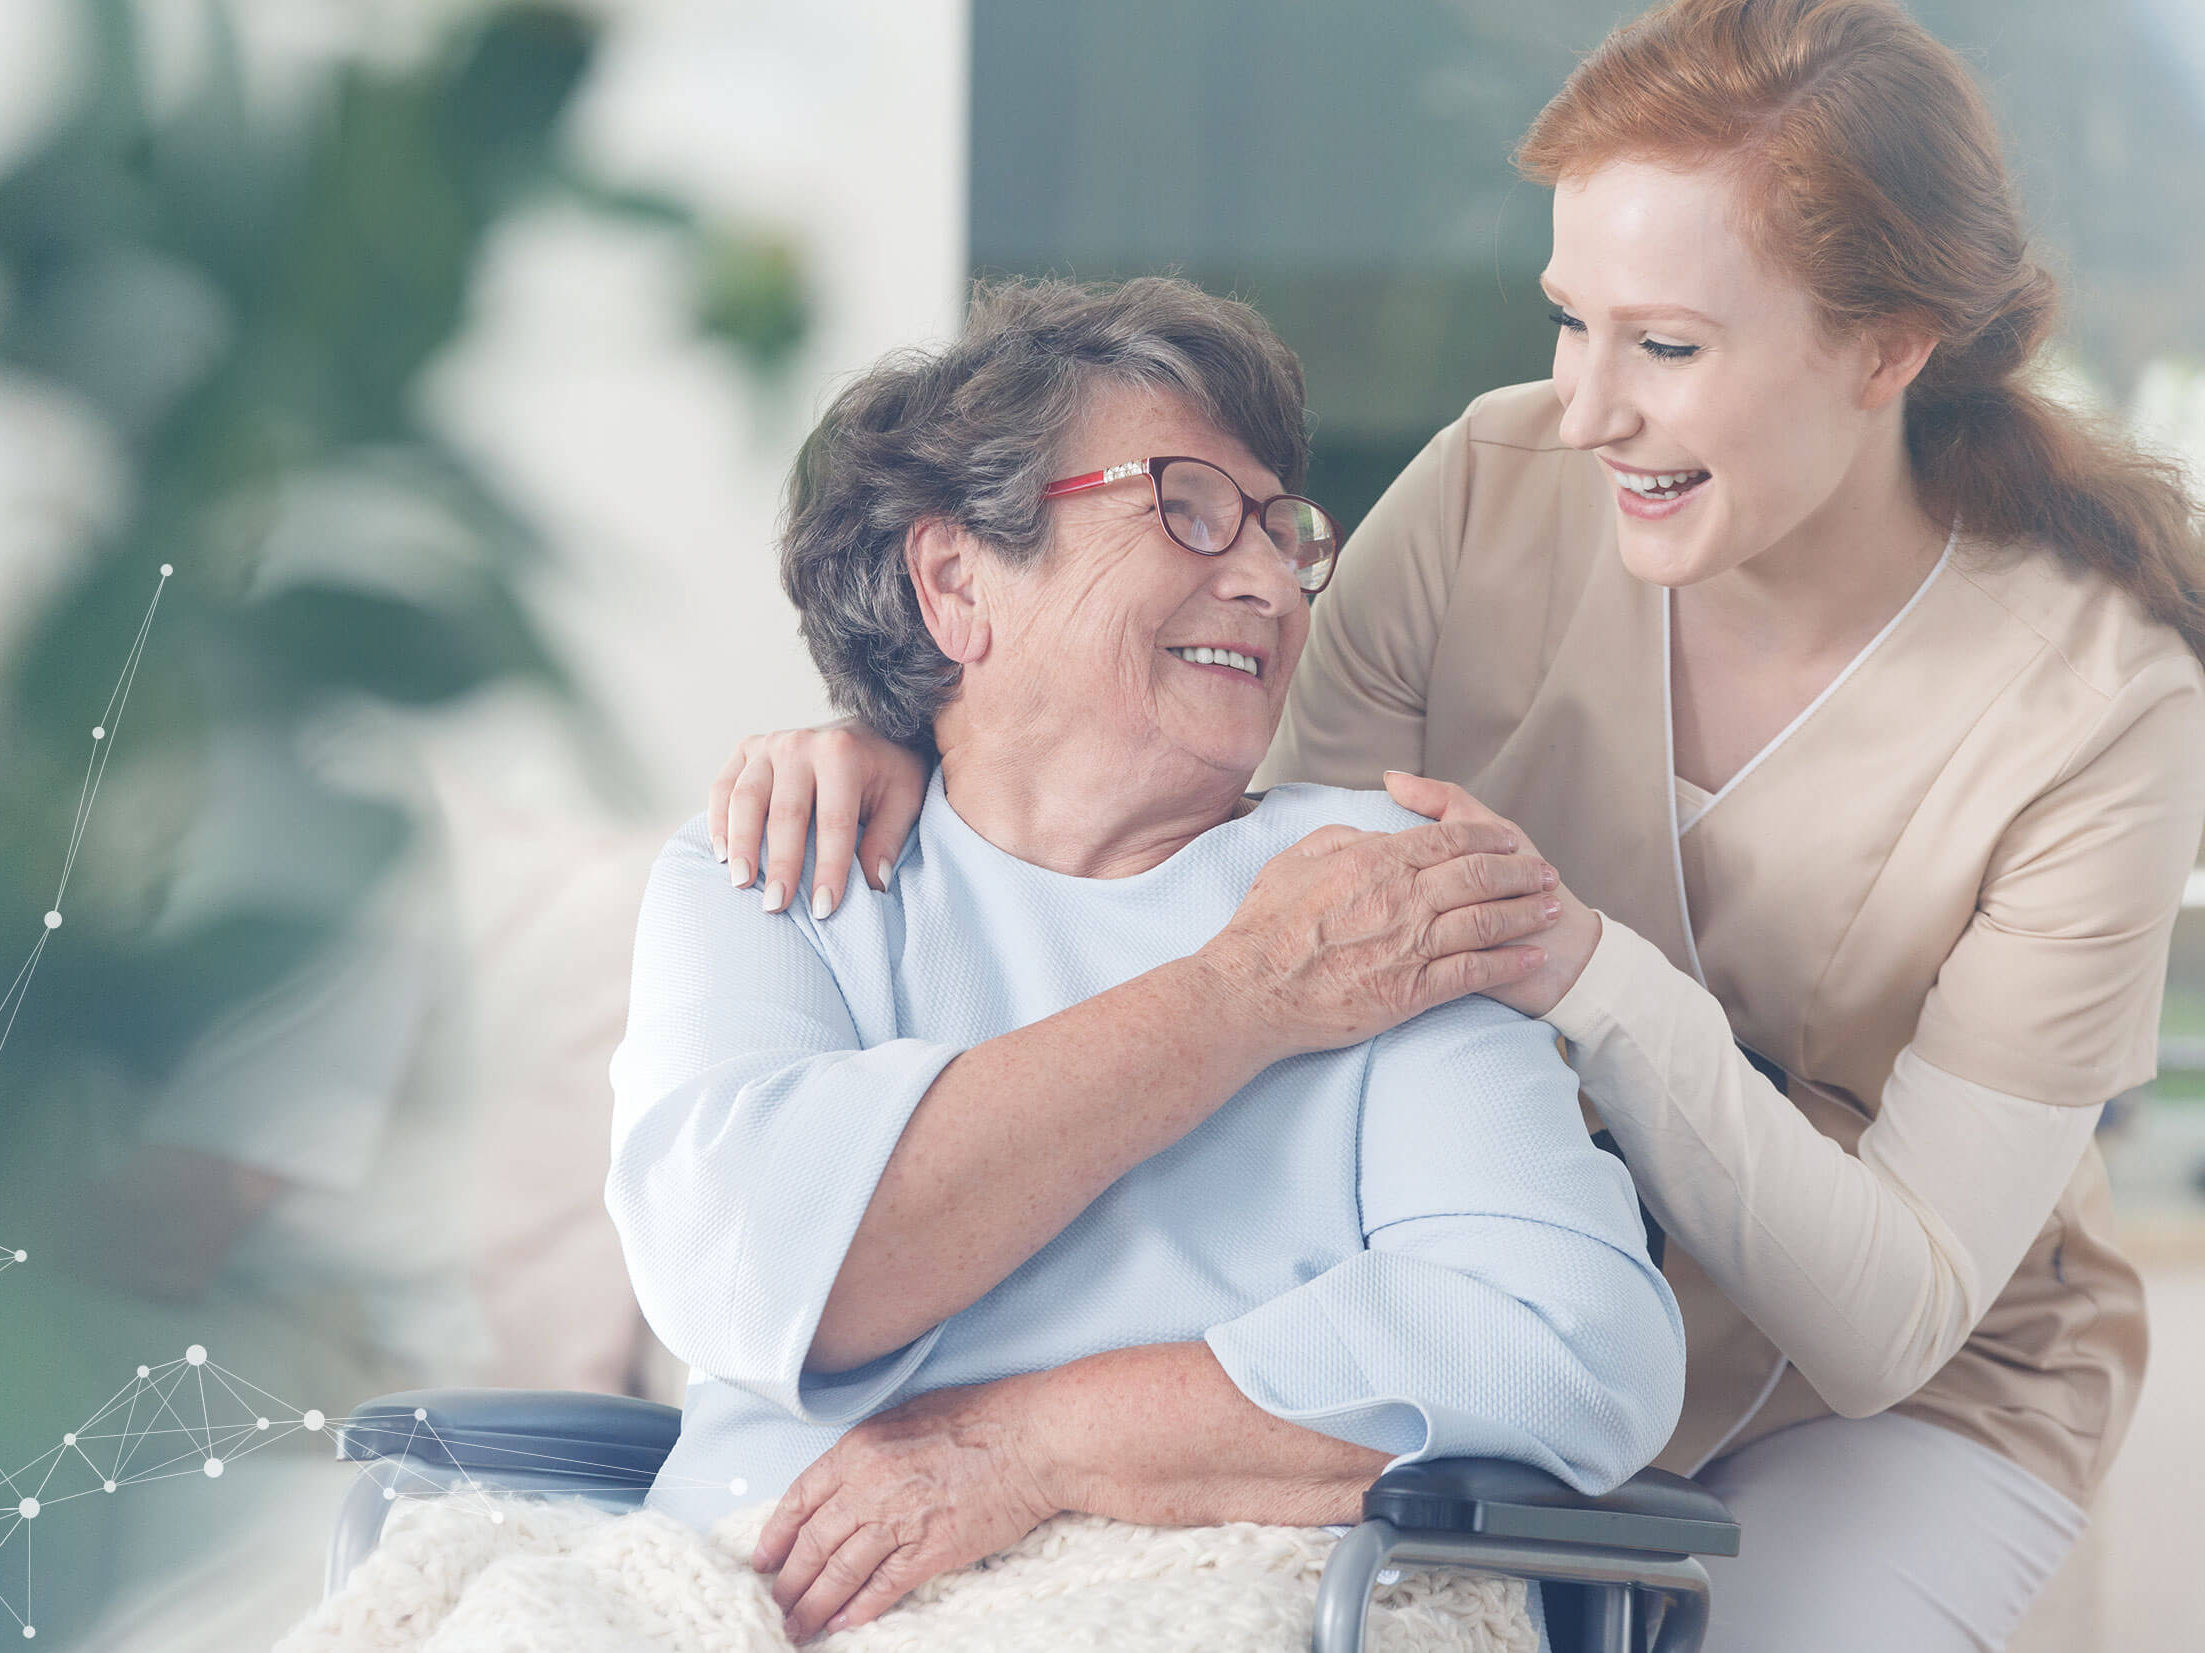 A female health-care worker standing behind a female elderly patient who is in a wheelchair. They are smiling at each other